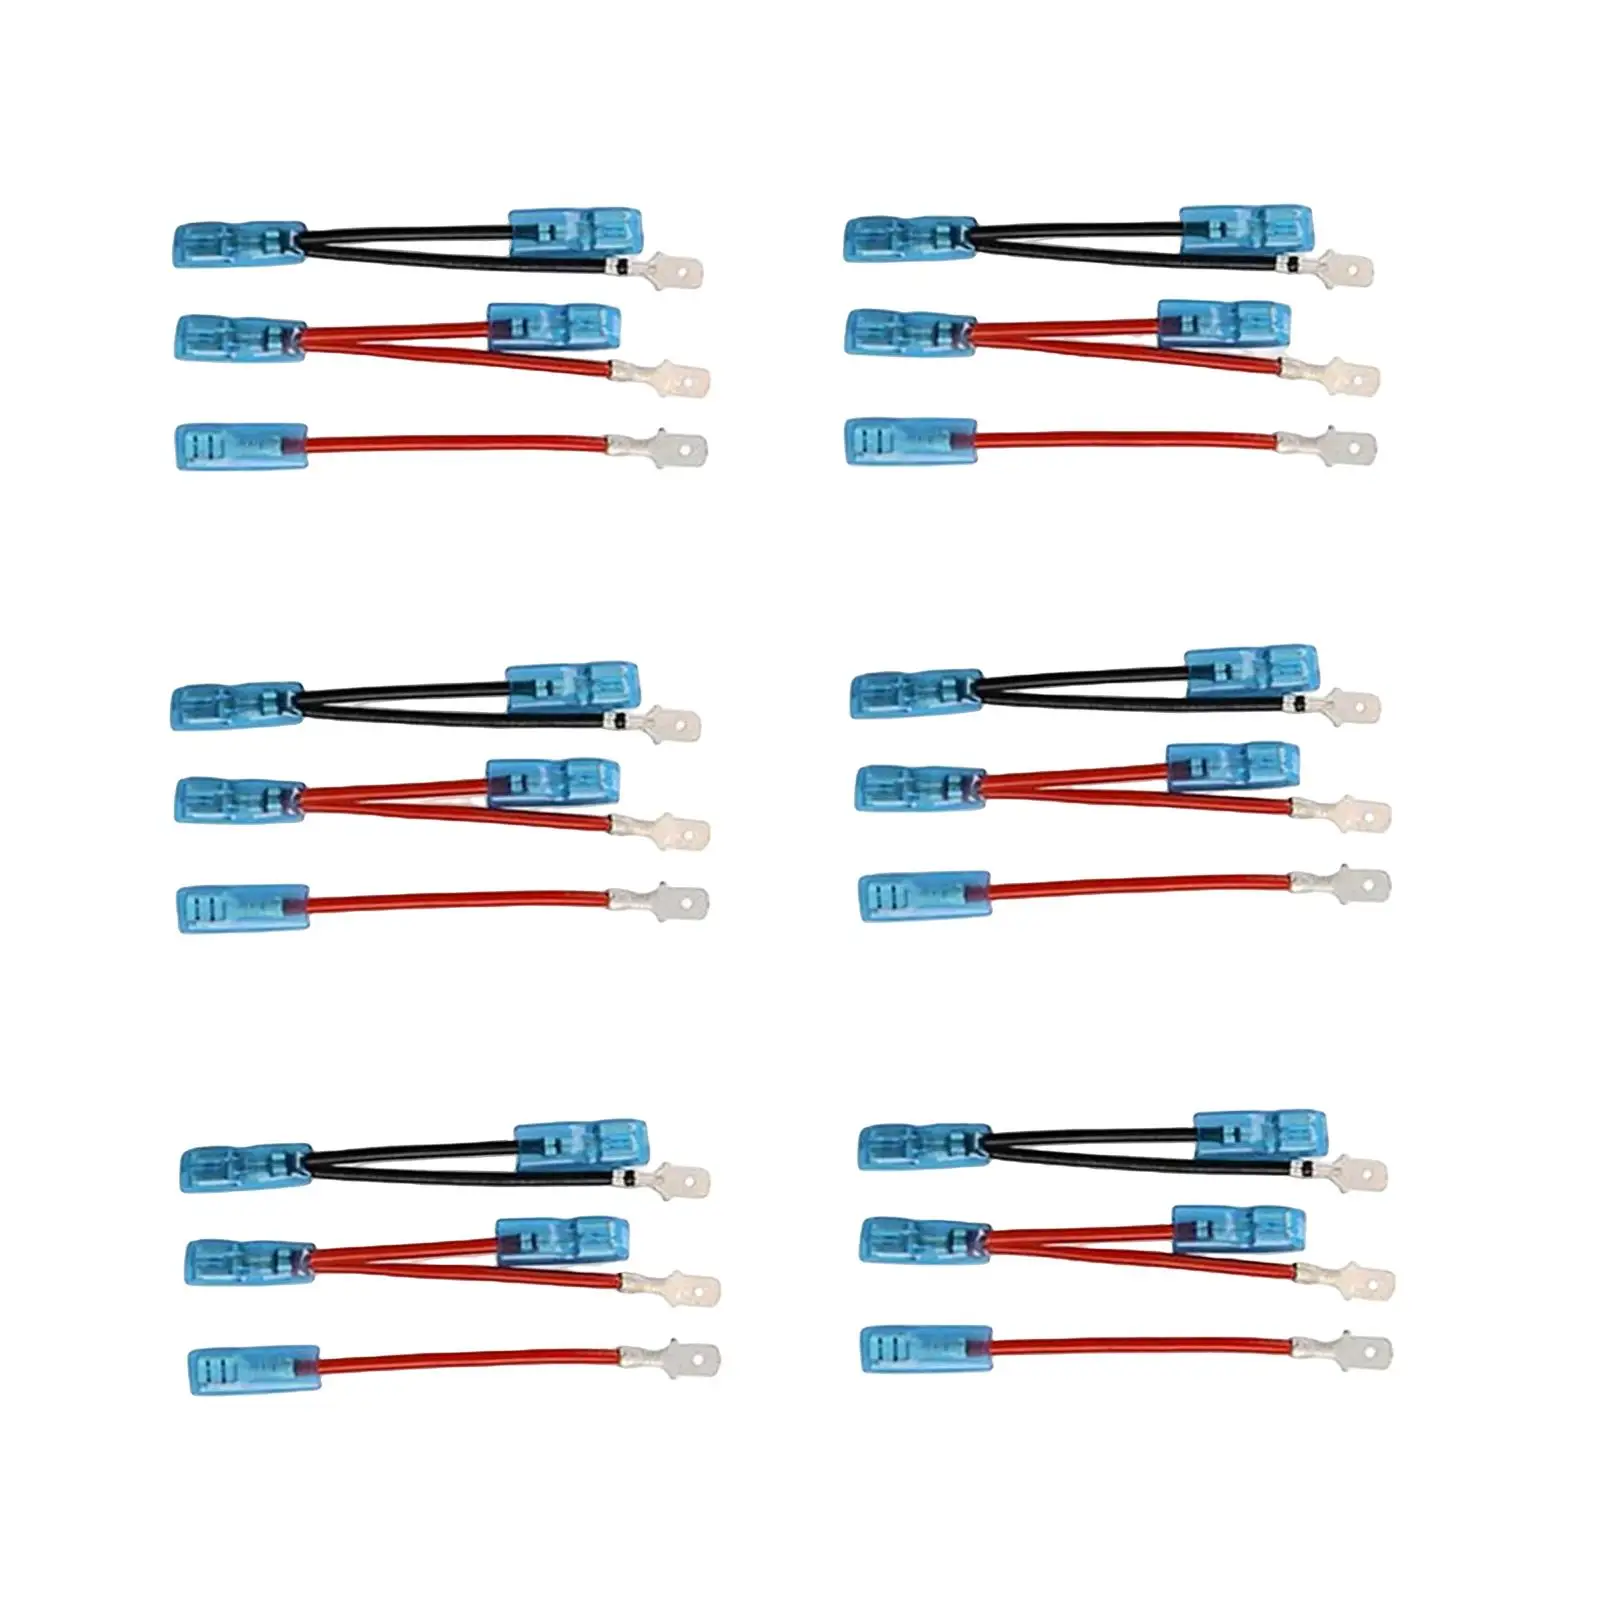 6Pcs 5 Pin Rocker Switch Jumper Wires Set Parts Accessories Professional Replaces Universal for Trucks Boat Train ATV Car